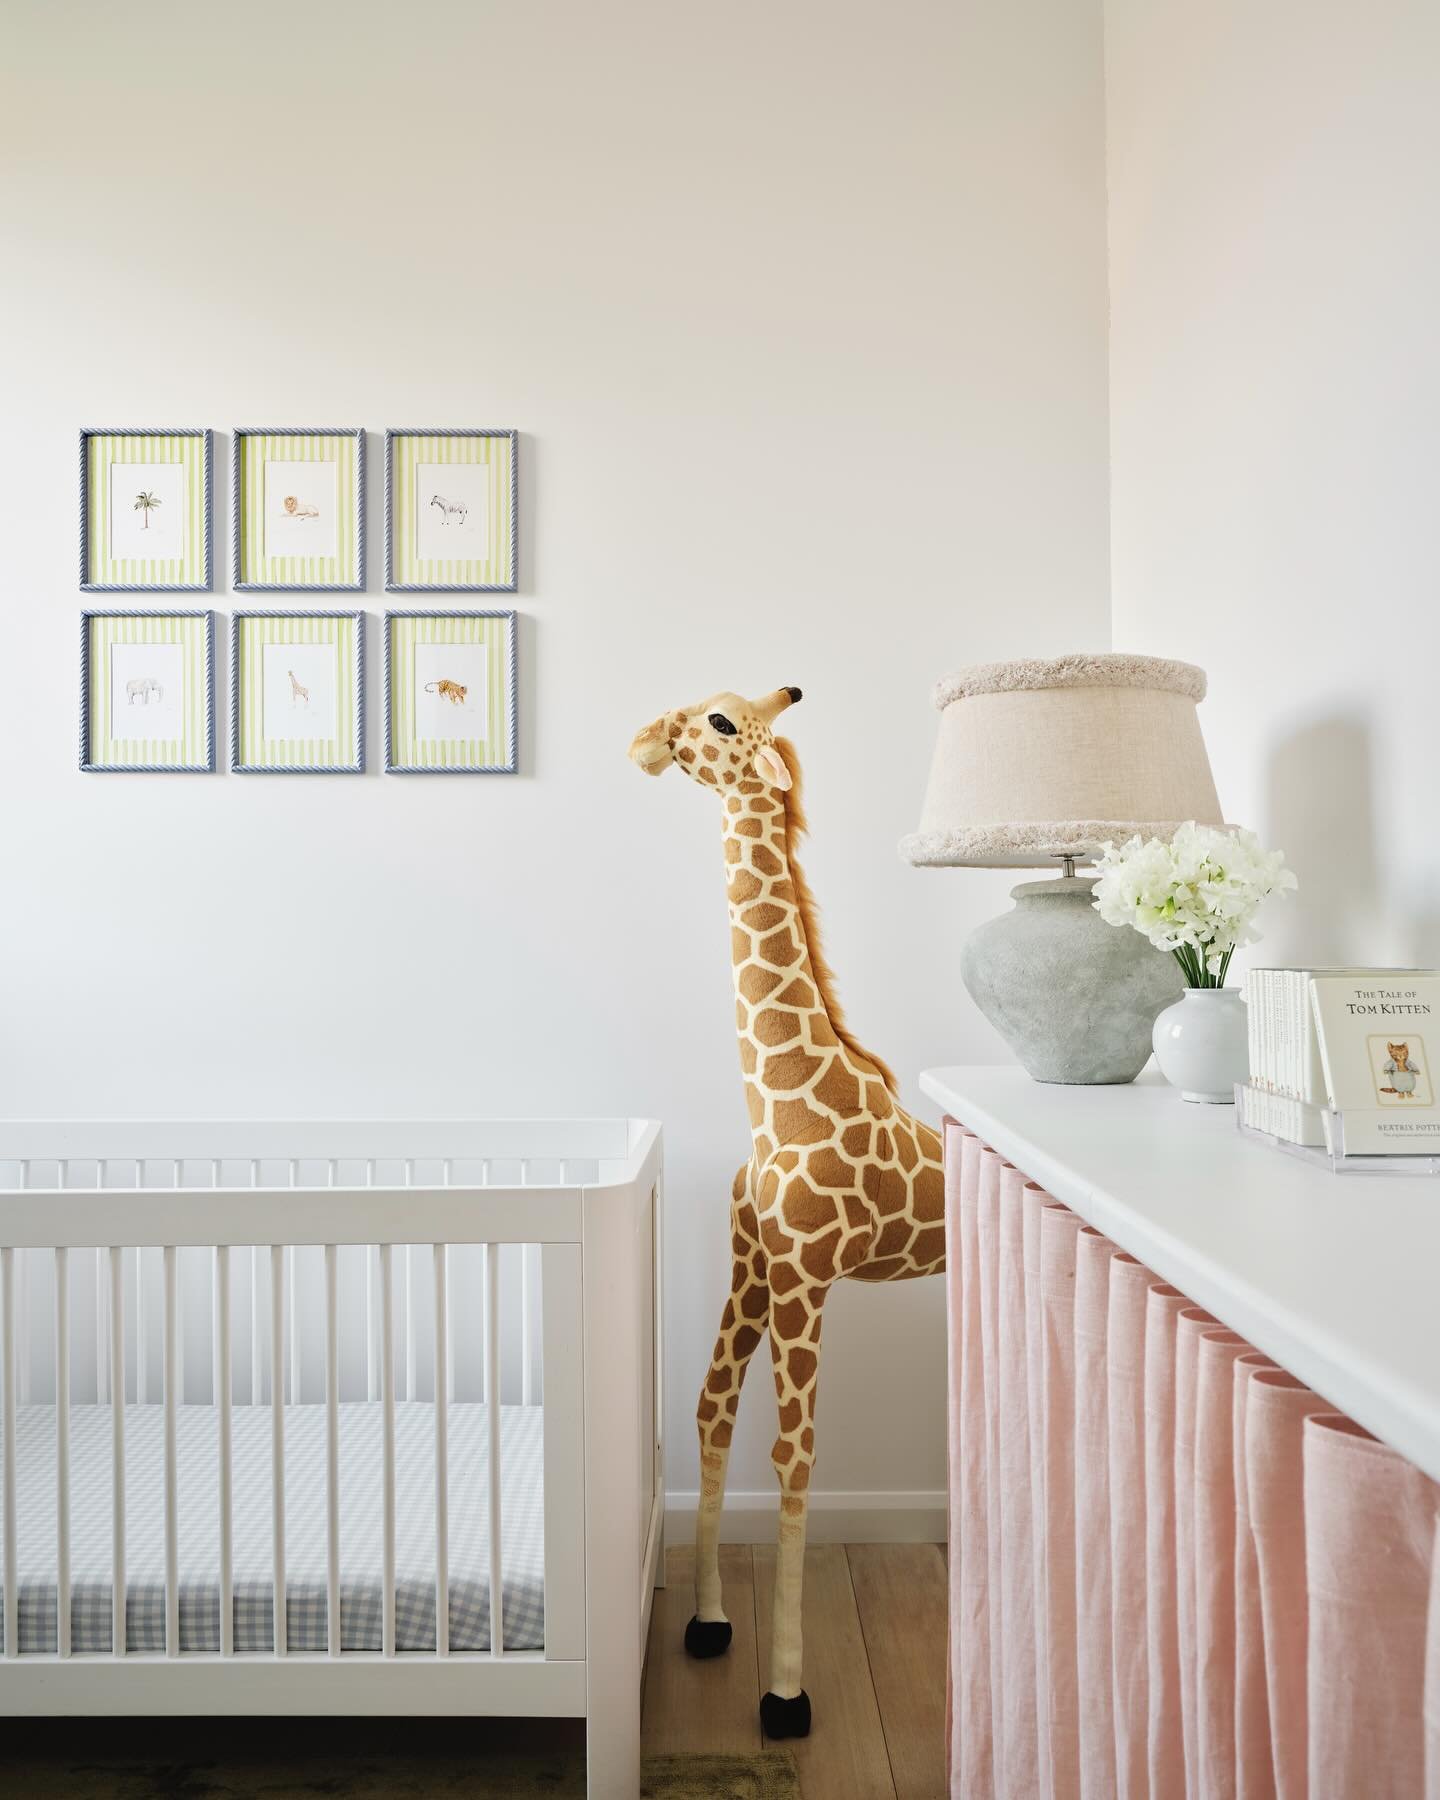 We love this nursery featuring 6 of the Animal Safari prints, a collection curated by the beautiful @oliviagiangrasso for an interiors project last year. 

Olivia paired our prints with @narissaperks bobbin twist frames in &lsquo;Cornflower Blue&rsqu